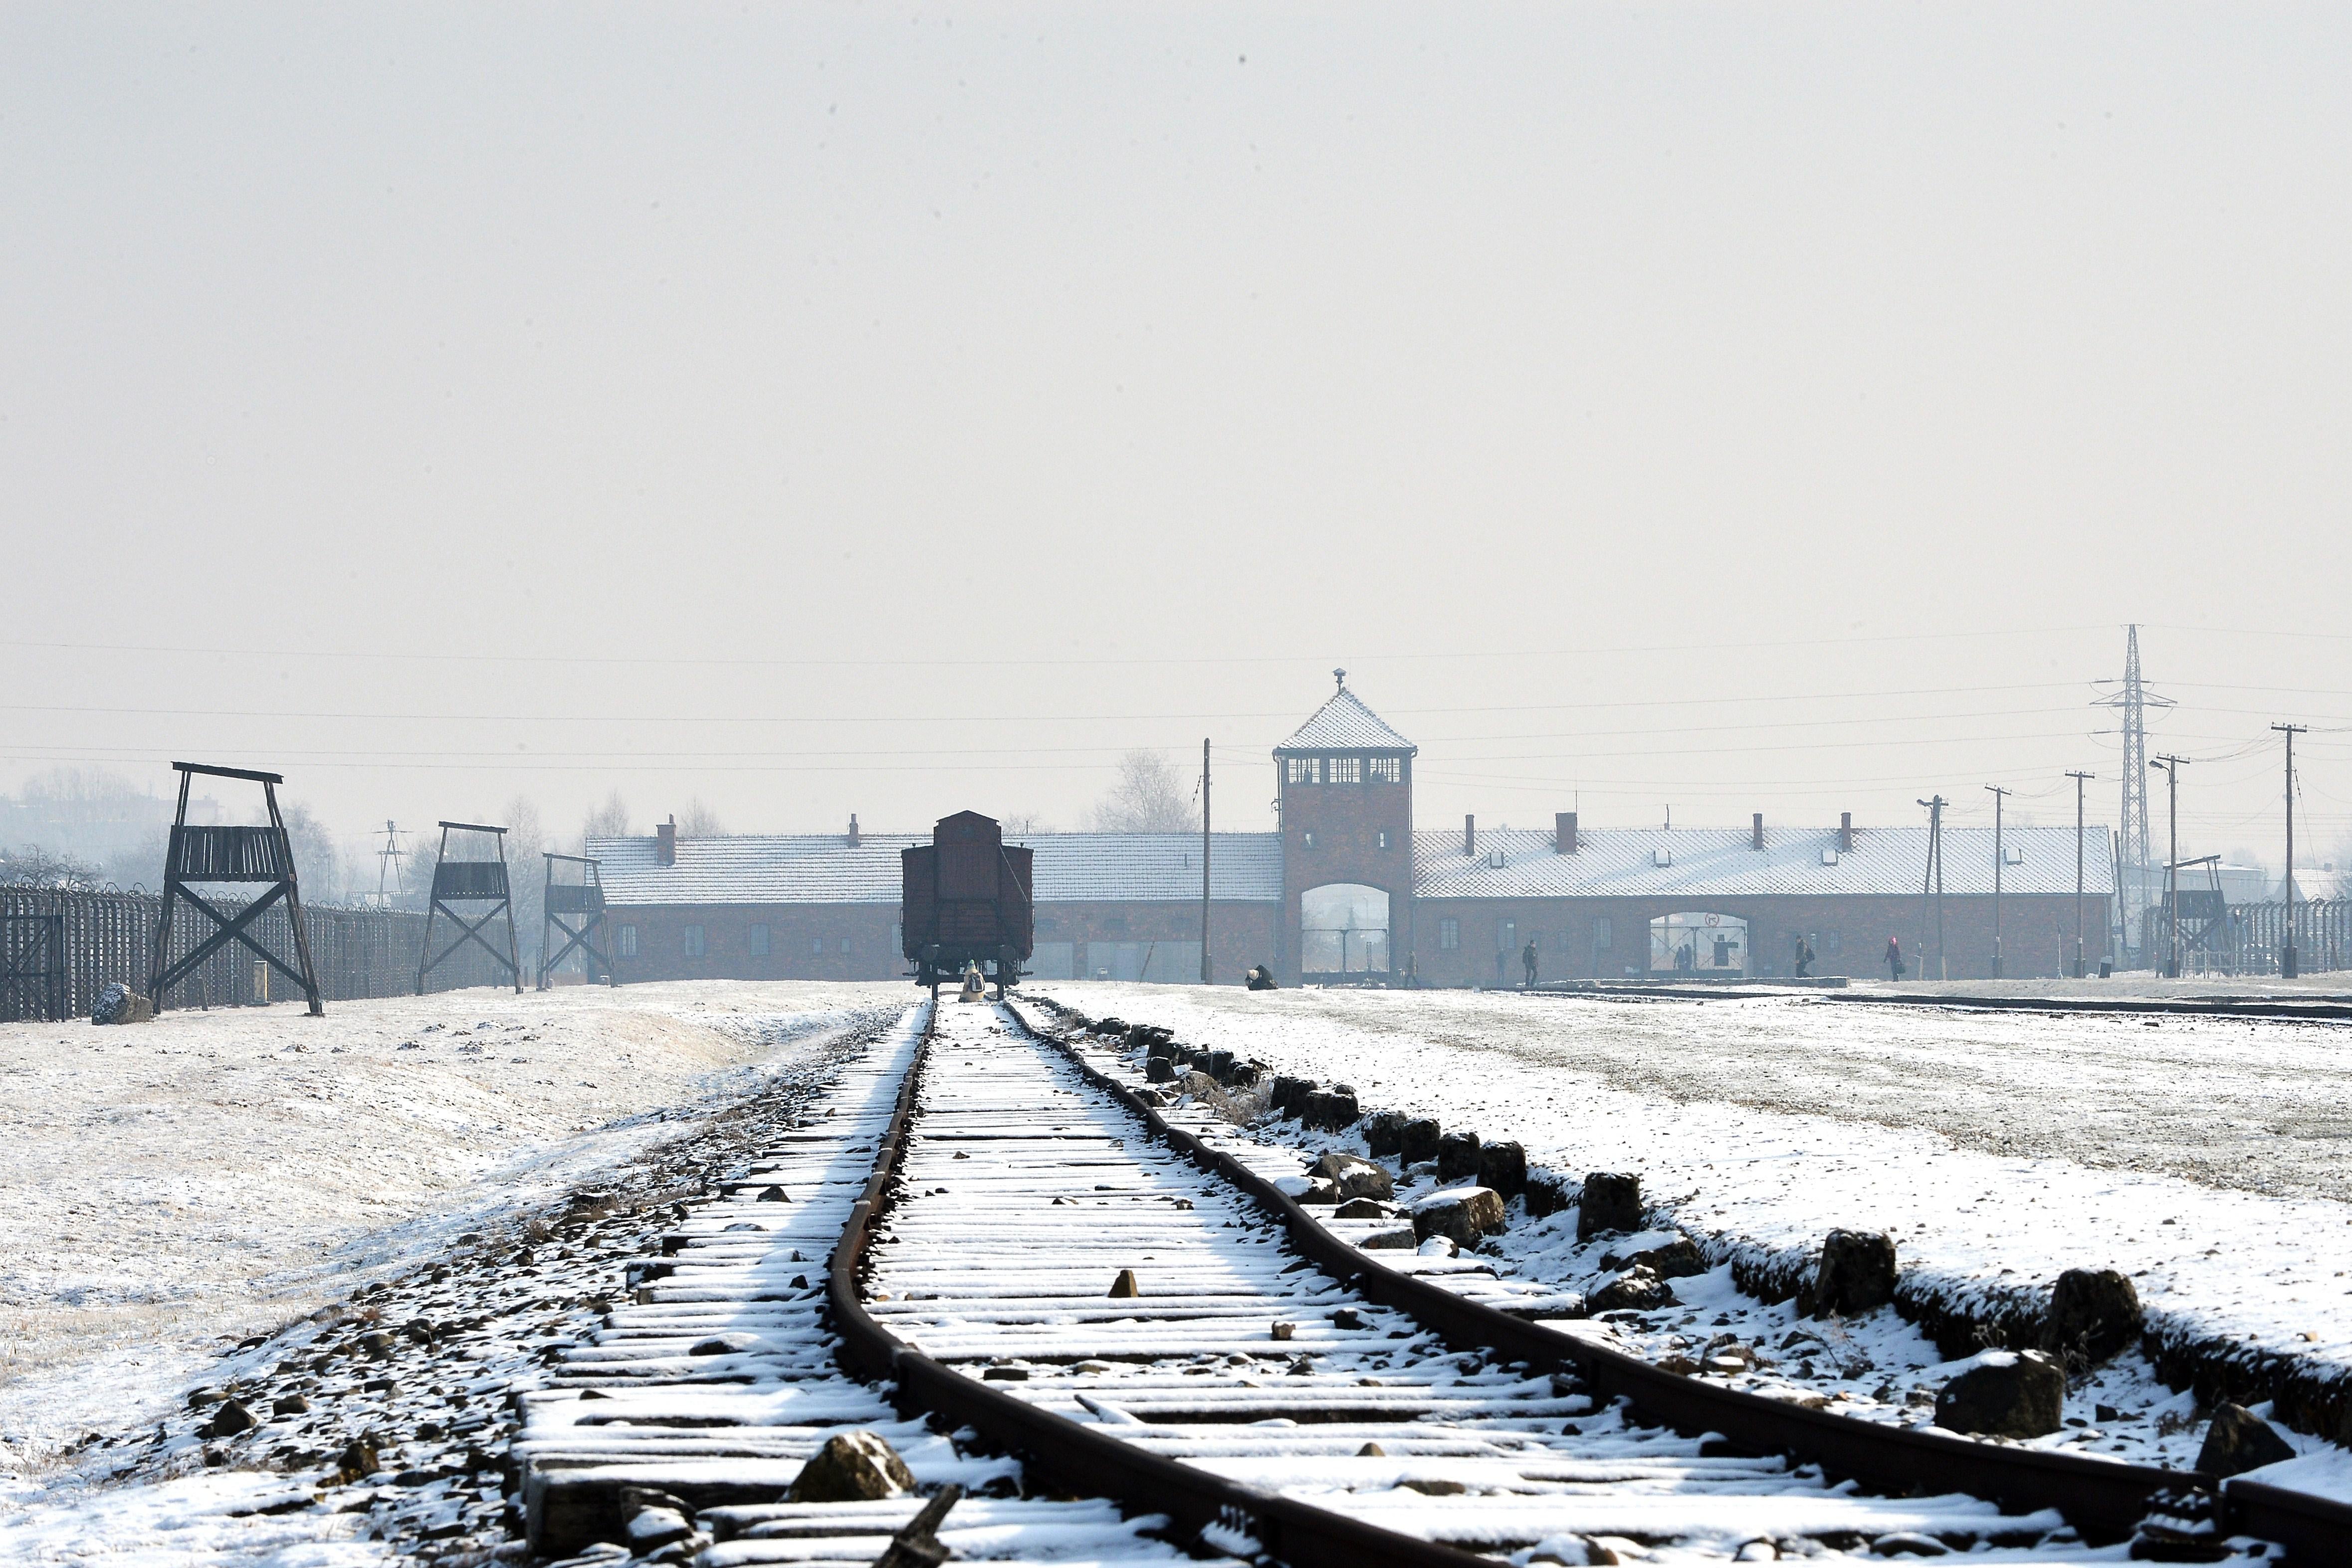 View of the rail way tracks at the former Nazi concentration camp Auschwitz-Birkenau in Oswiecim, Poland, on Holocaust Day, January 27, 2014. The ceremony took place 69 years after the liberation of the death camp by Soviet troops, in rememberance of the victims of the Holocaust. AFP PHOTO/JANEK SKARZYNSKI        (Photo credit should read JANEK SKARZYNSKI/AFP/Getty Images)